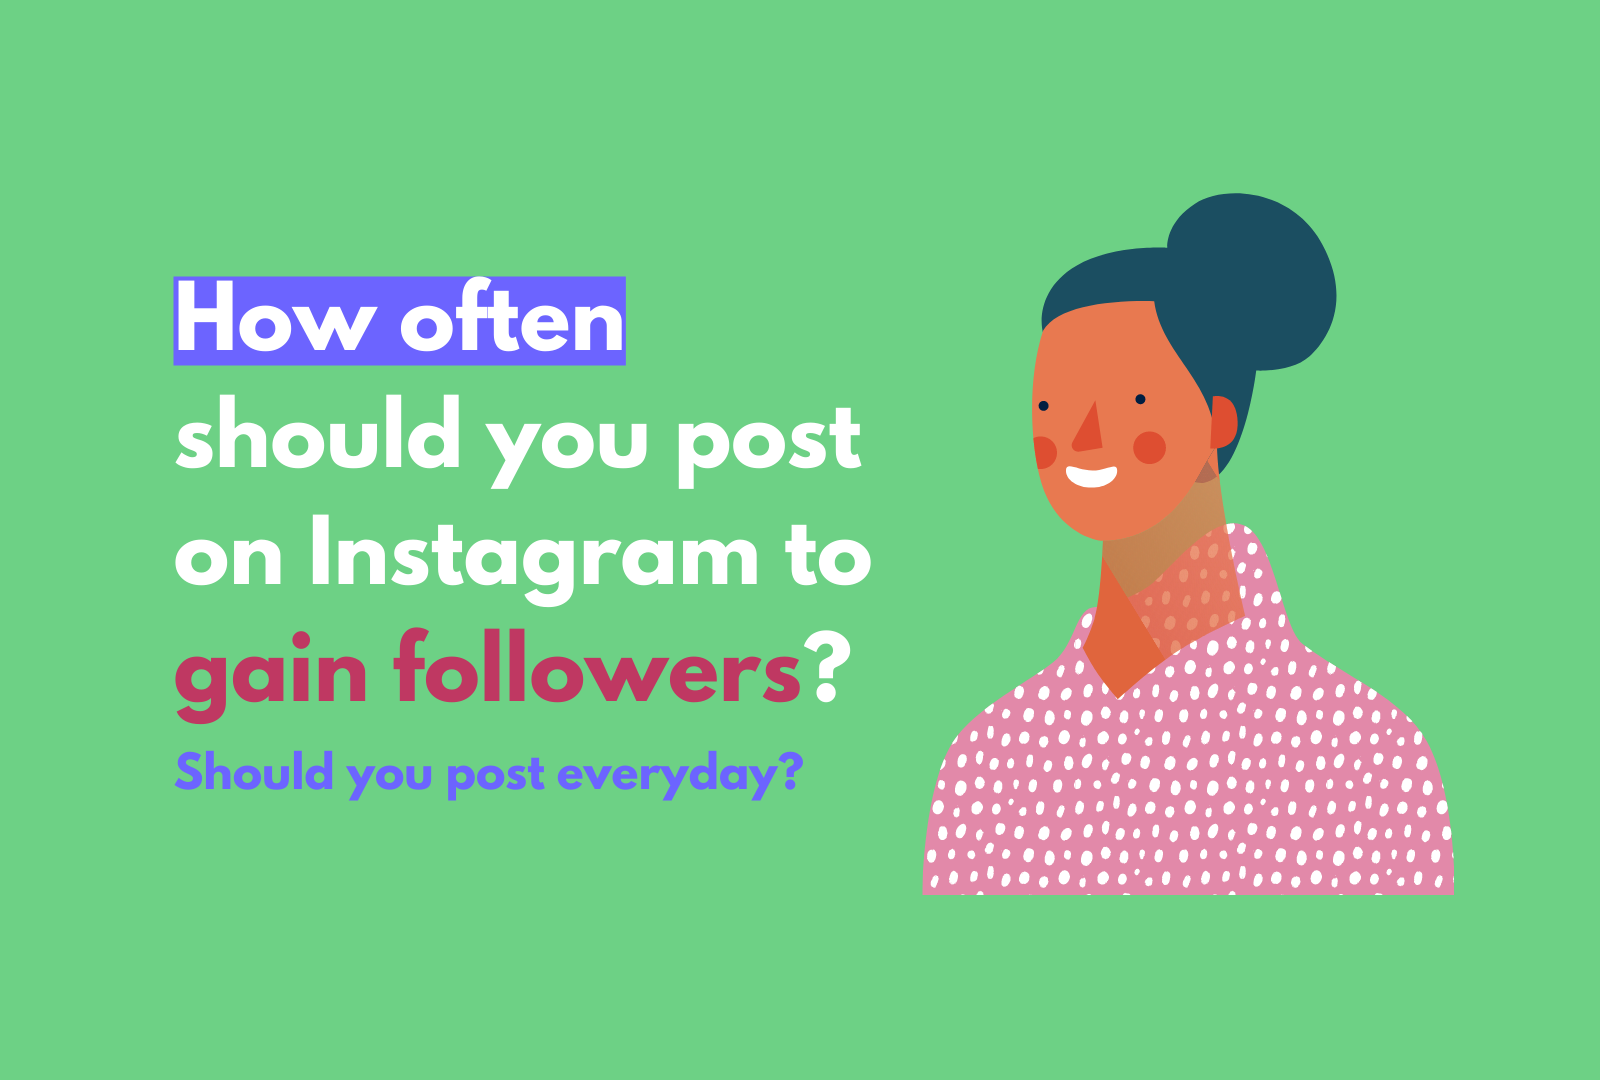 How often should I post on Instagram to gain followers? Should I post everyday? 